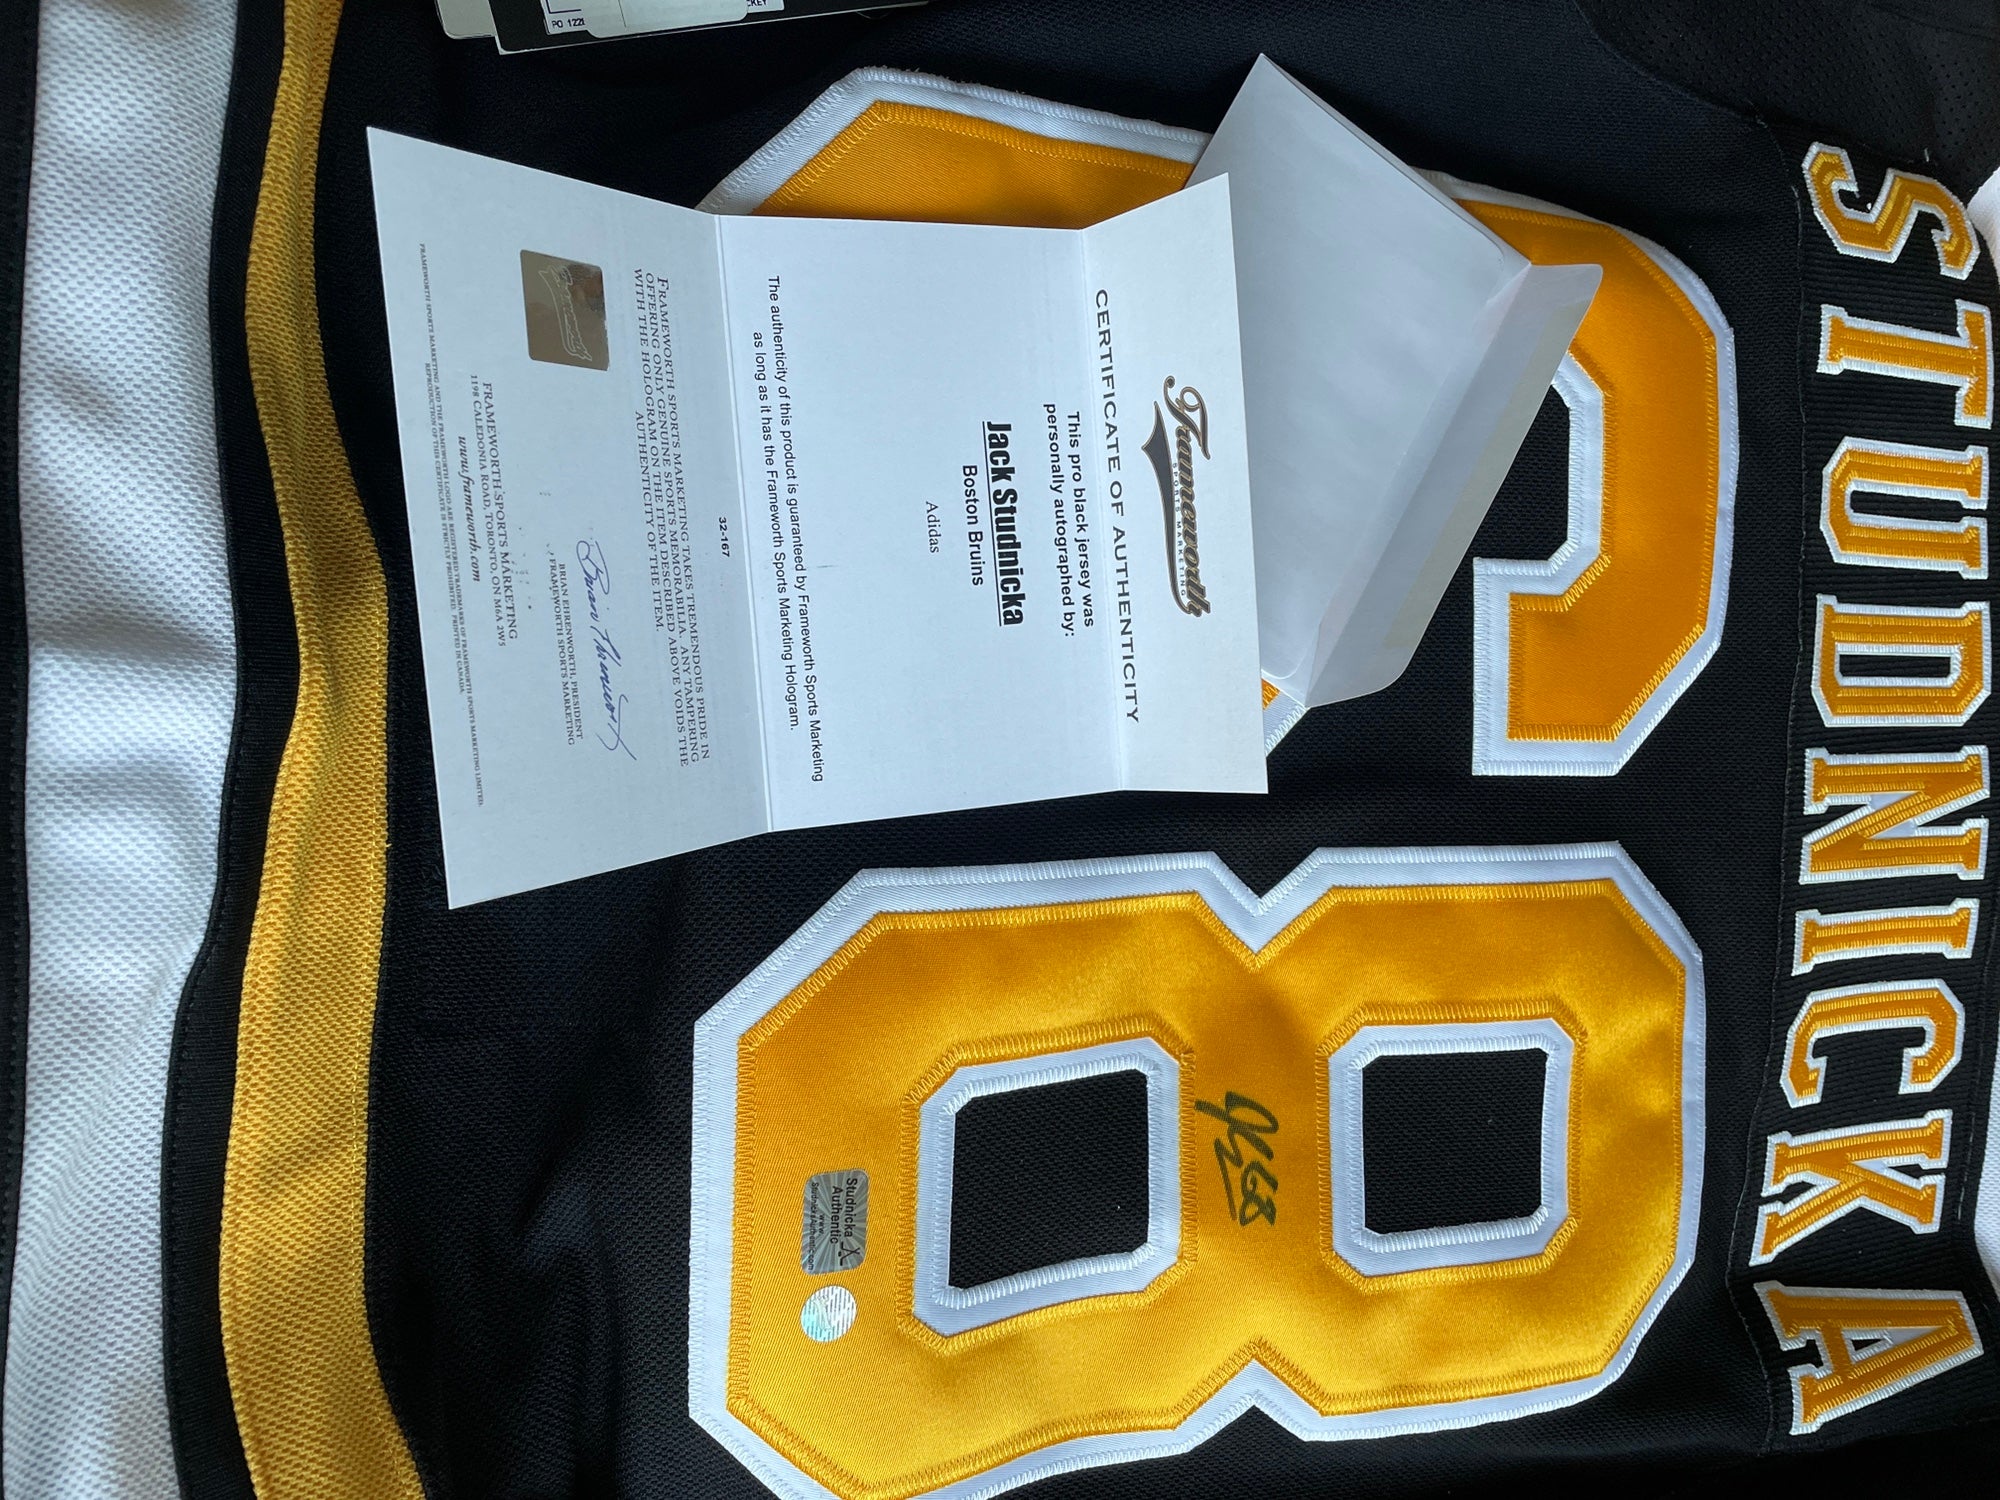 Frameworth Pittsburgh Penguins: Black Pro Adidas Jersey Signed by